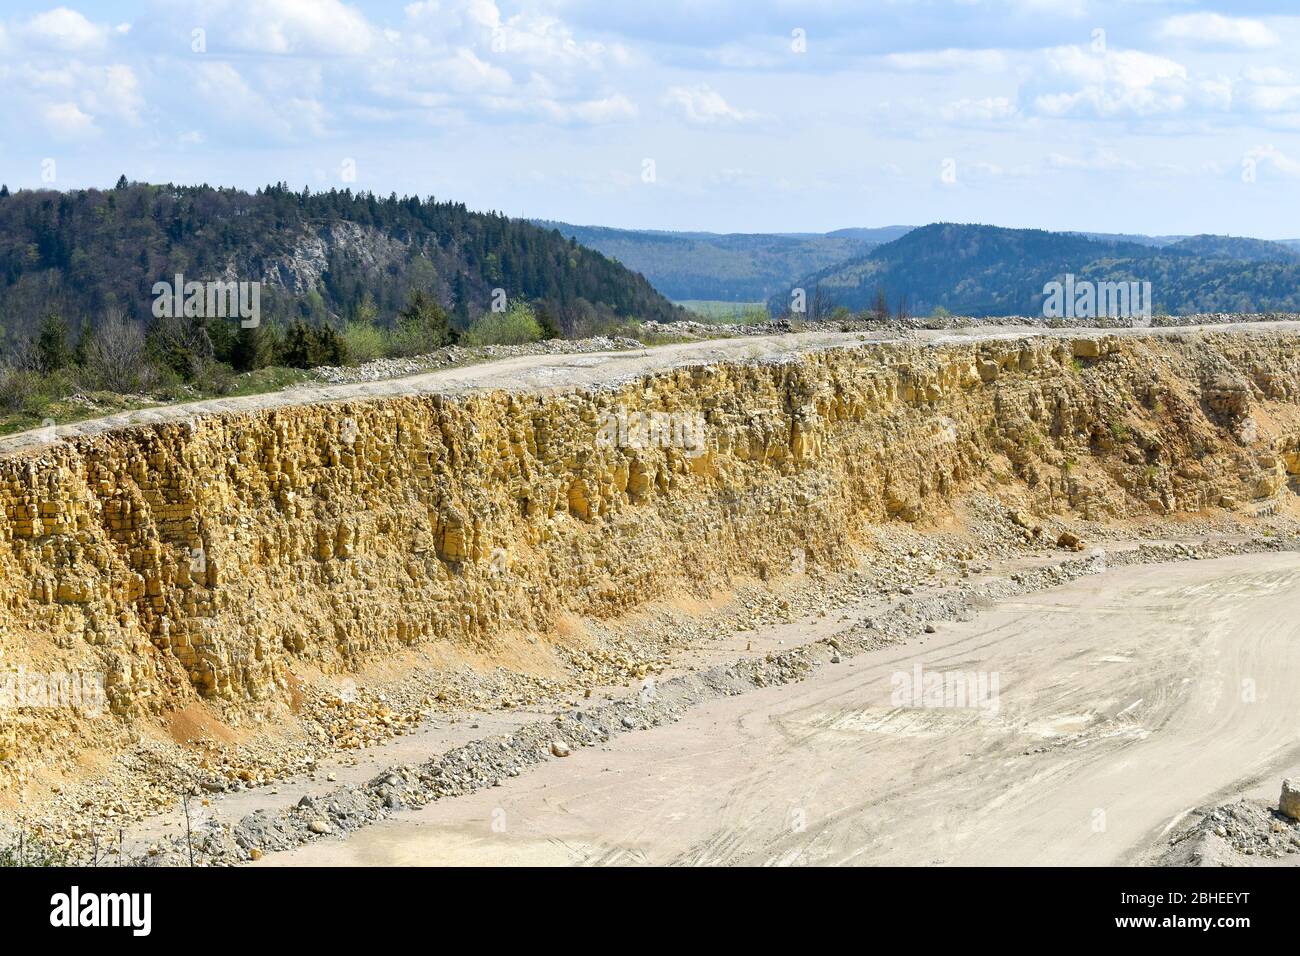 Mining, quarrying, and production of stone at a quarry. Stock Photo